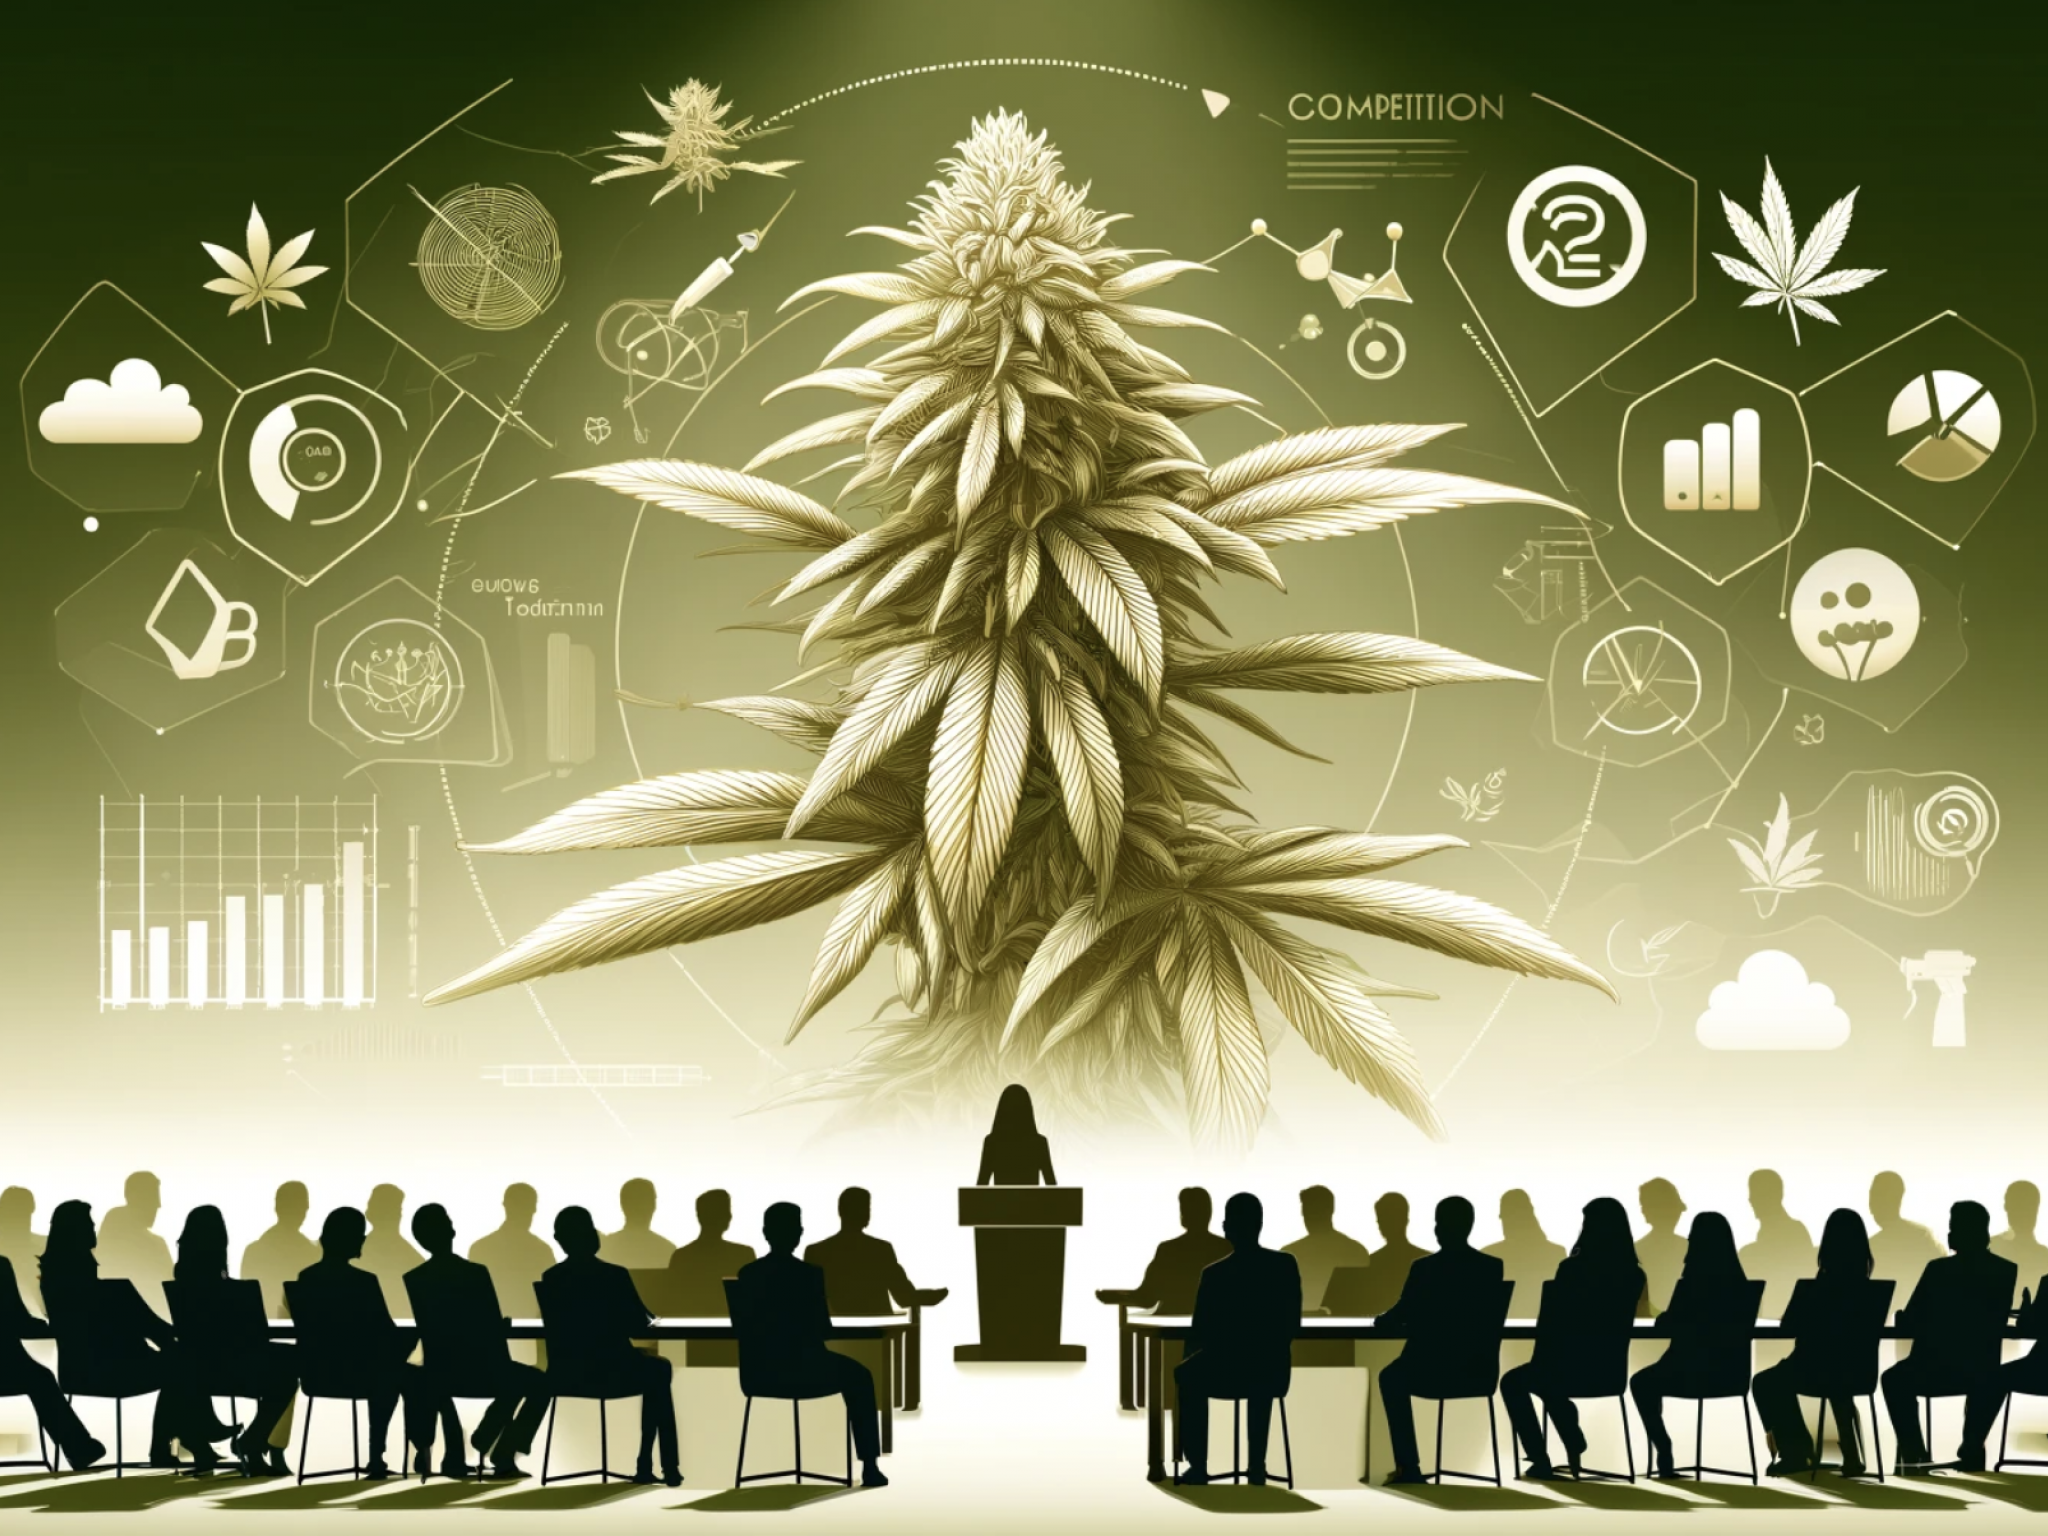  pitch-your-cannabis-business-and-win-thousands-in-prizes-at-this-benzinga--curaleaf-competition 